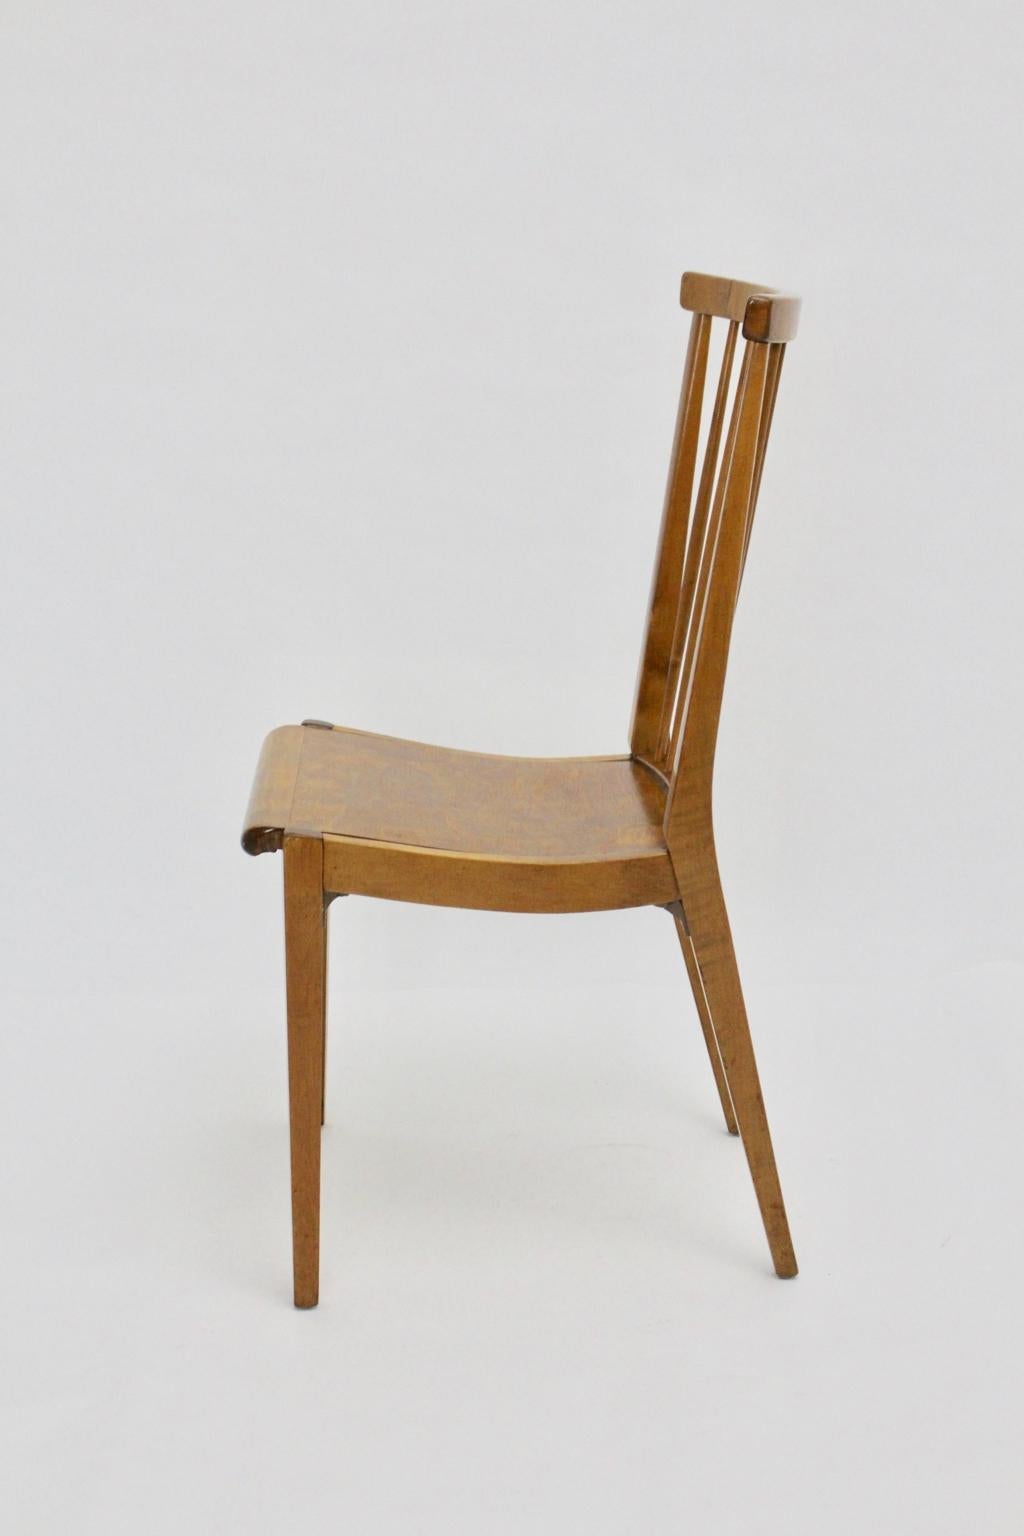 our maple tree chair